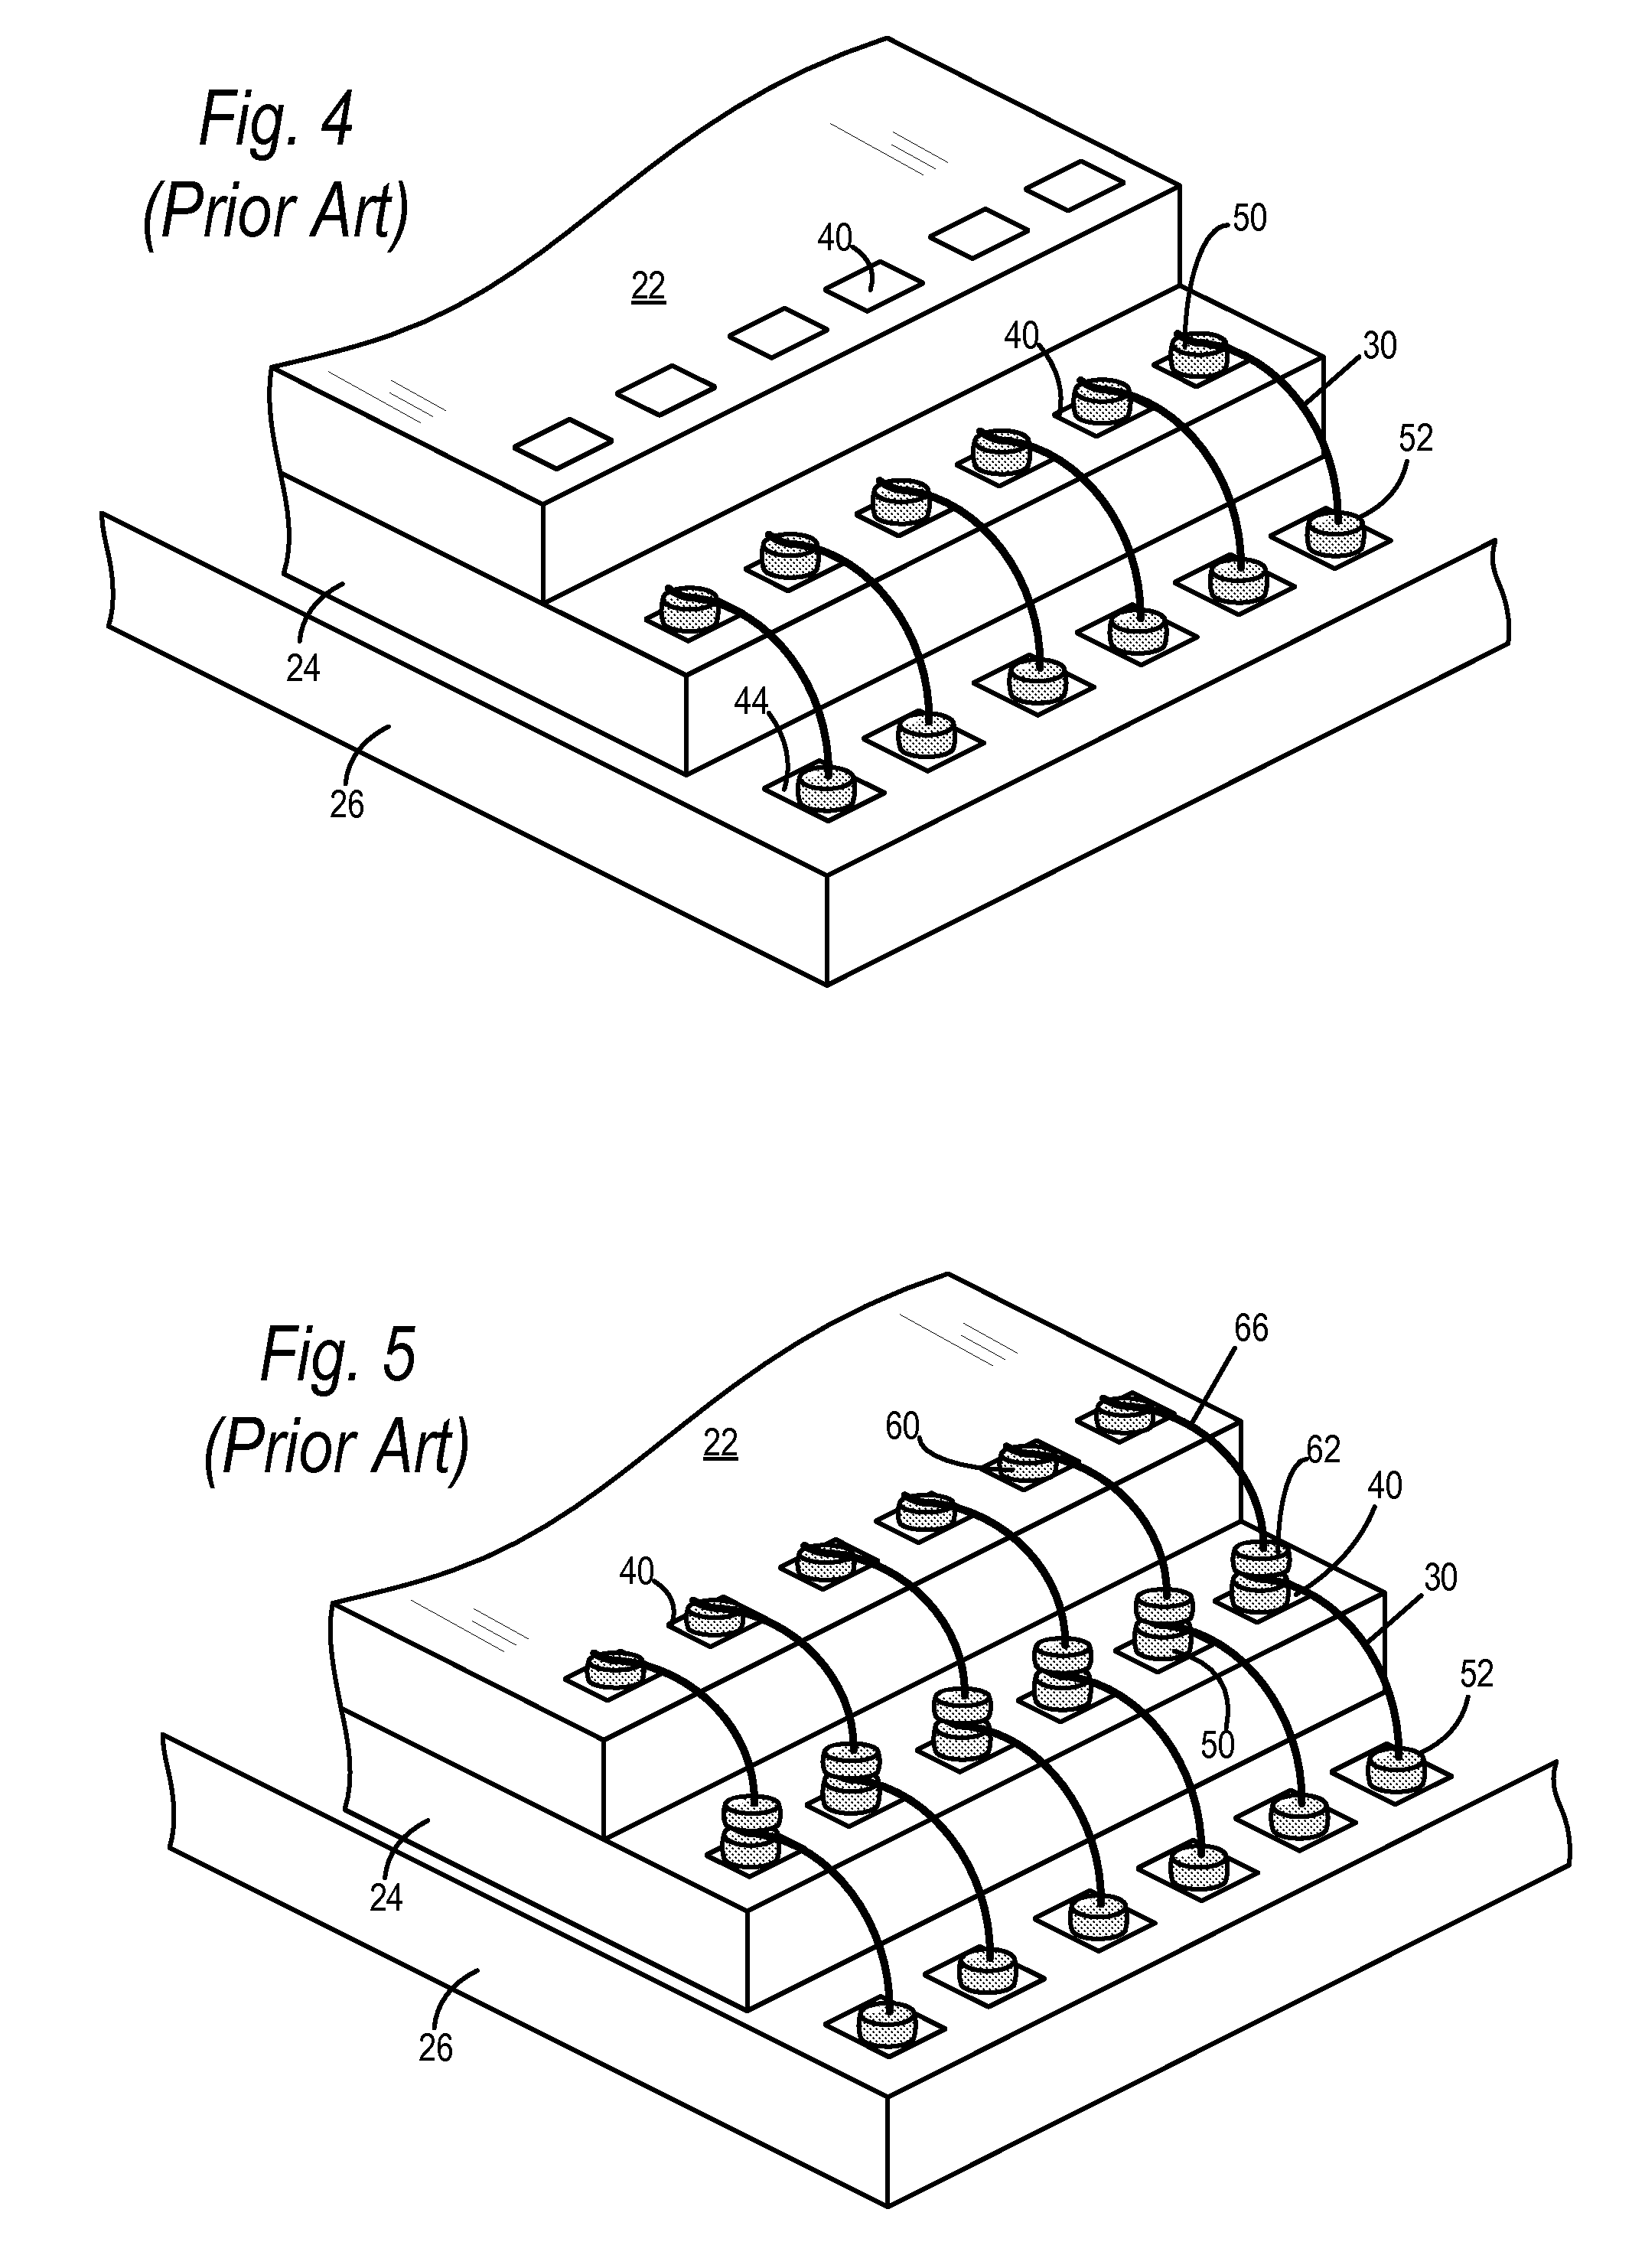 Method of fabricating wire on wire stitch bonding in a semiconductor device